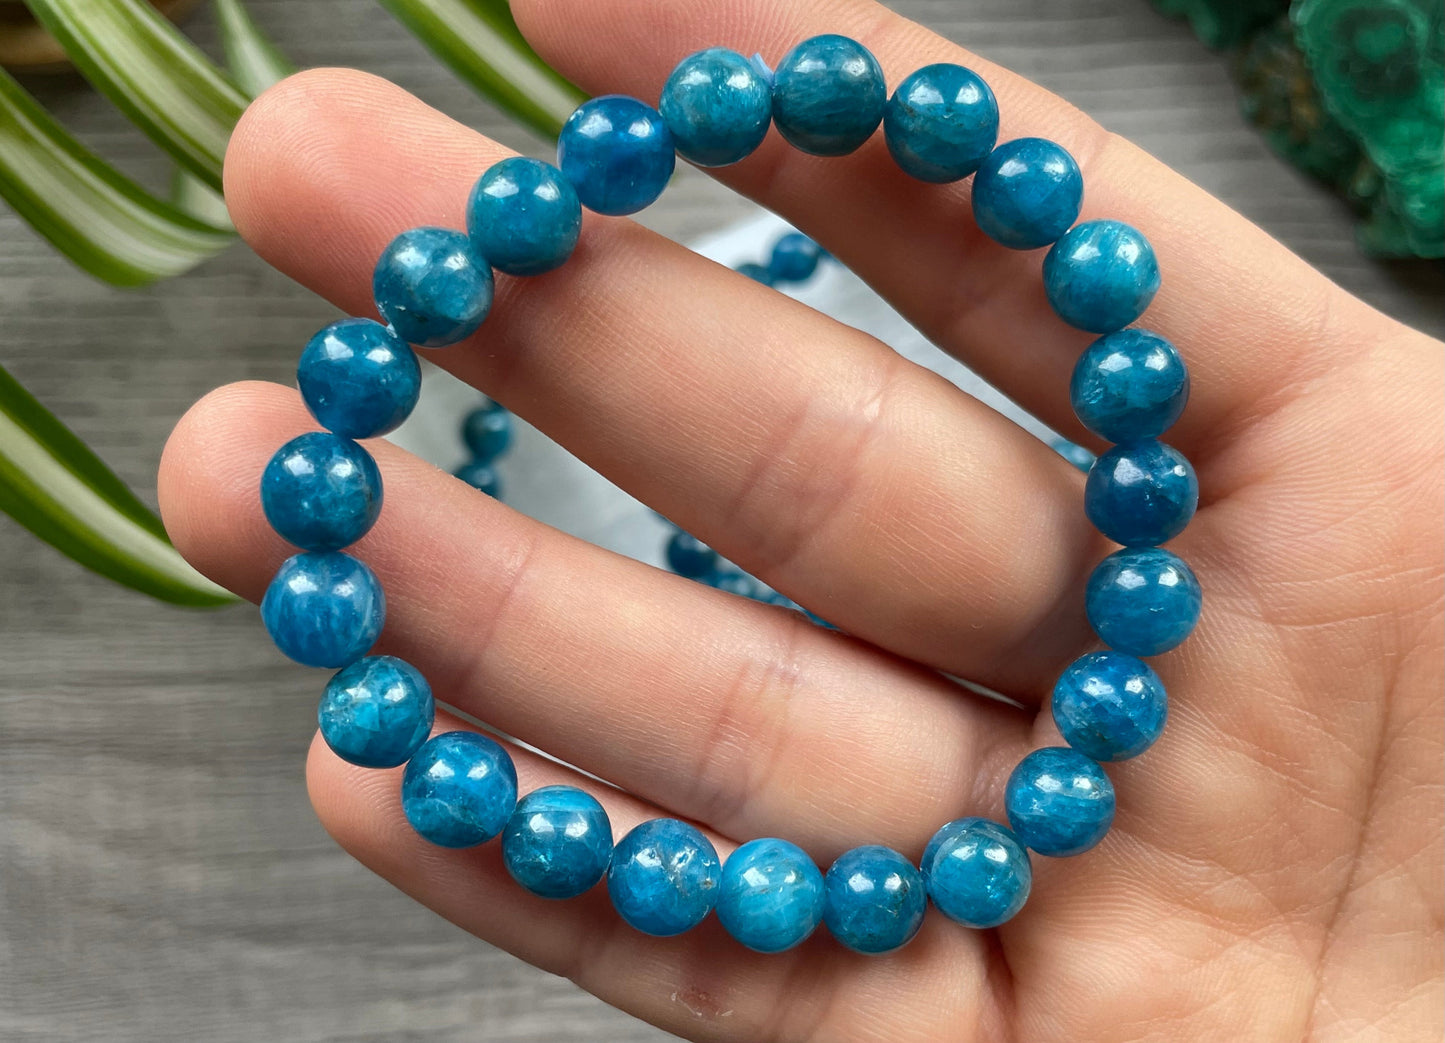 Pictured is a blue apatite bead bracelet.